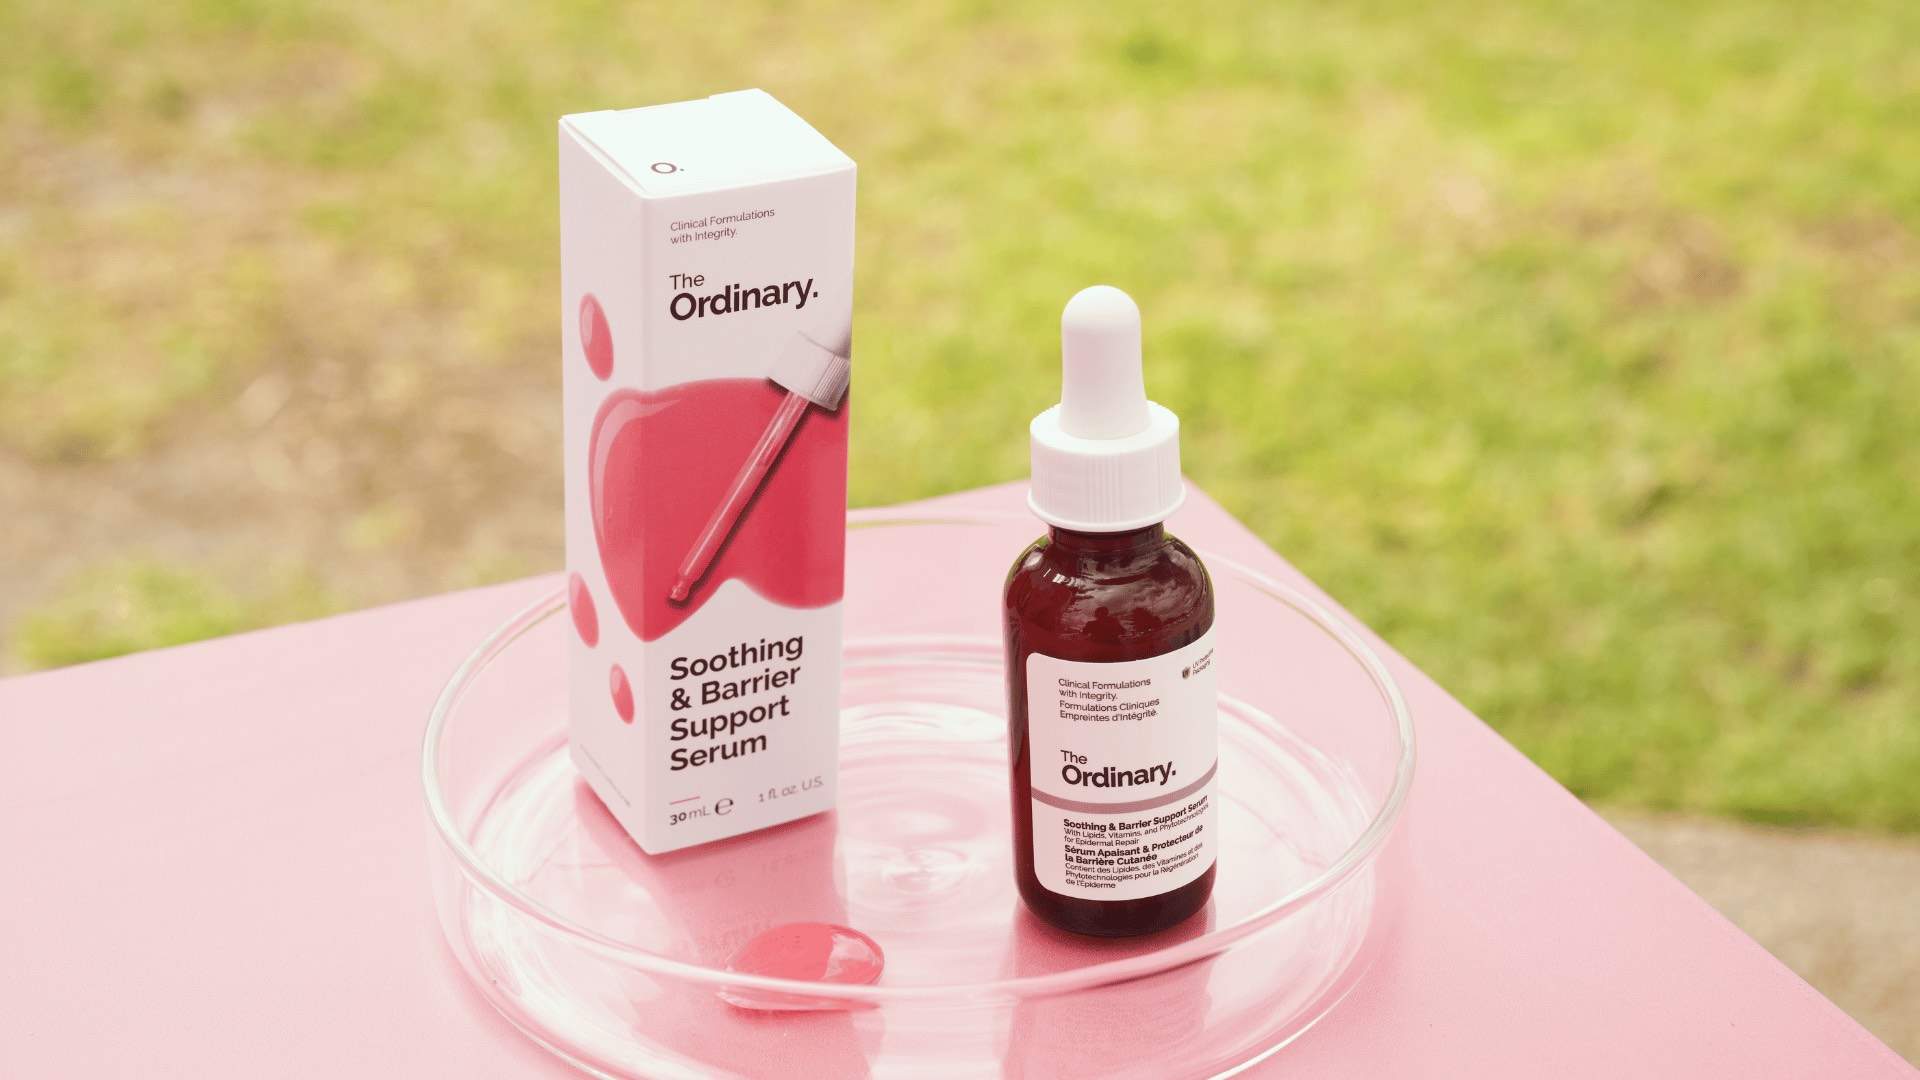 The Ordinary's new pink serum at The Ordinary's pop-up in Bondi.